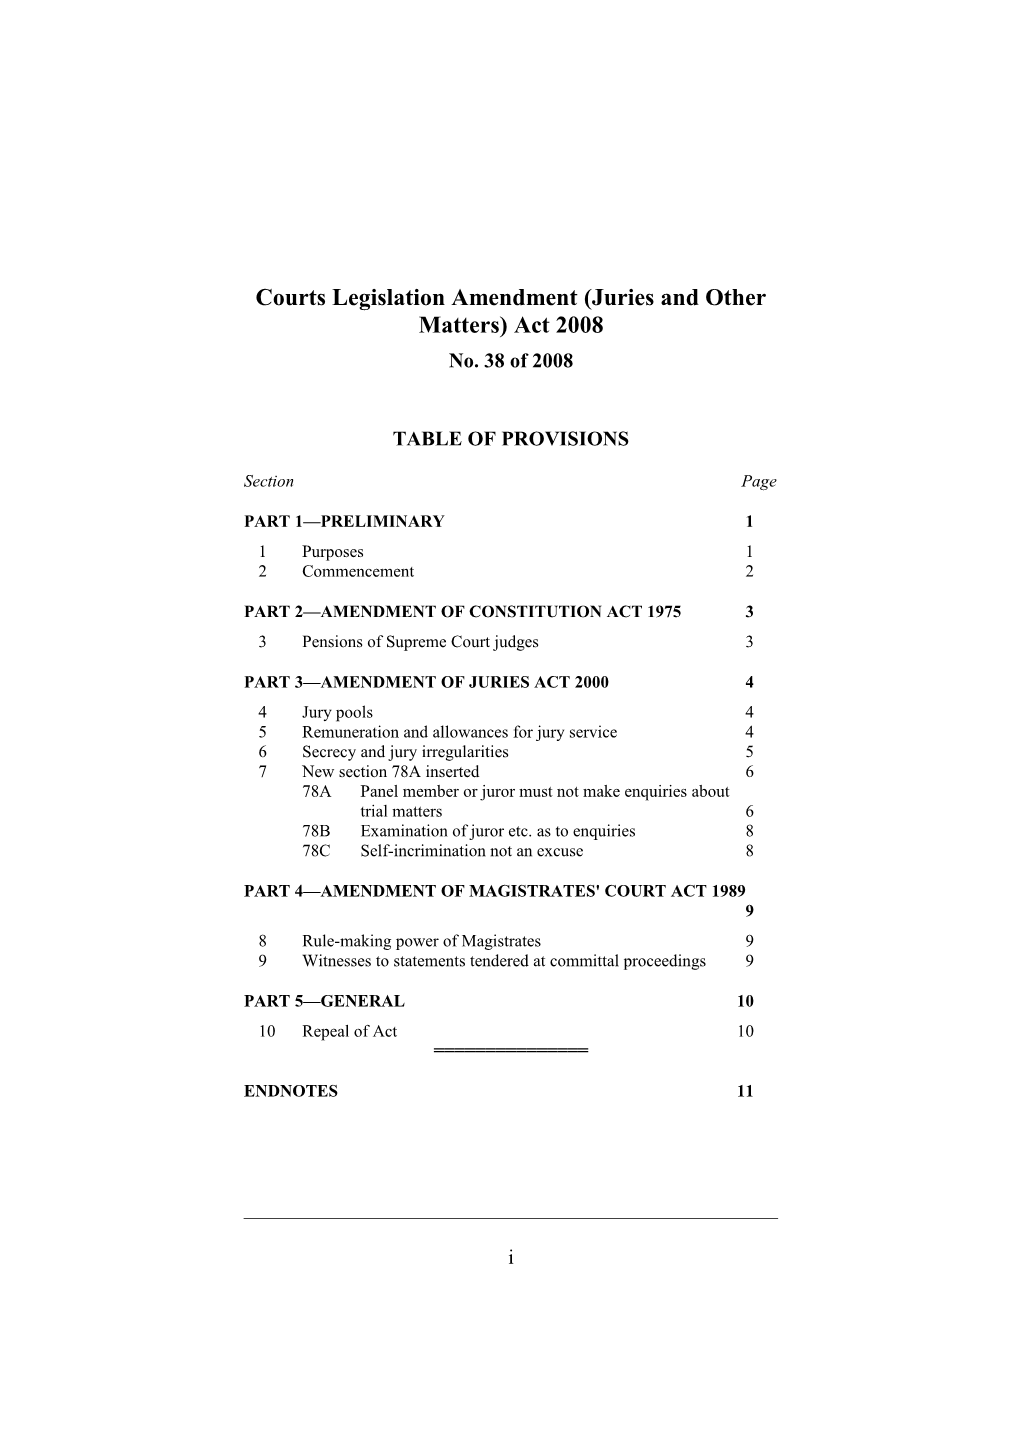 Courts Legislation Amendment (Juries and Other Matters) Act 2008